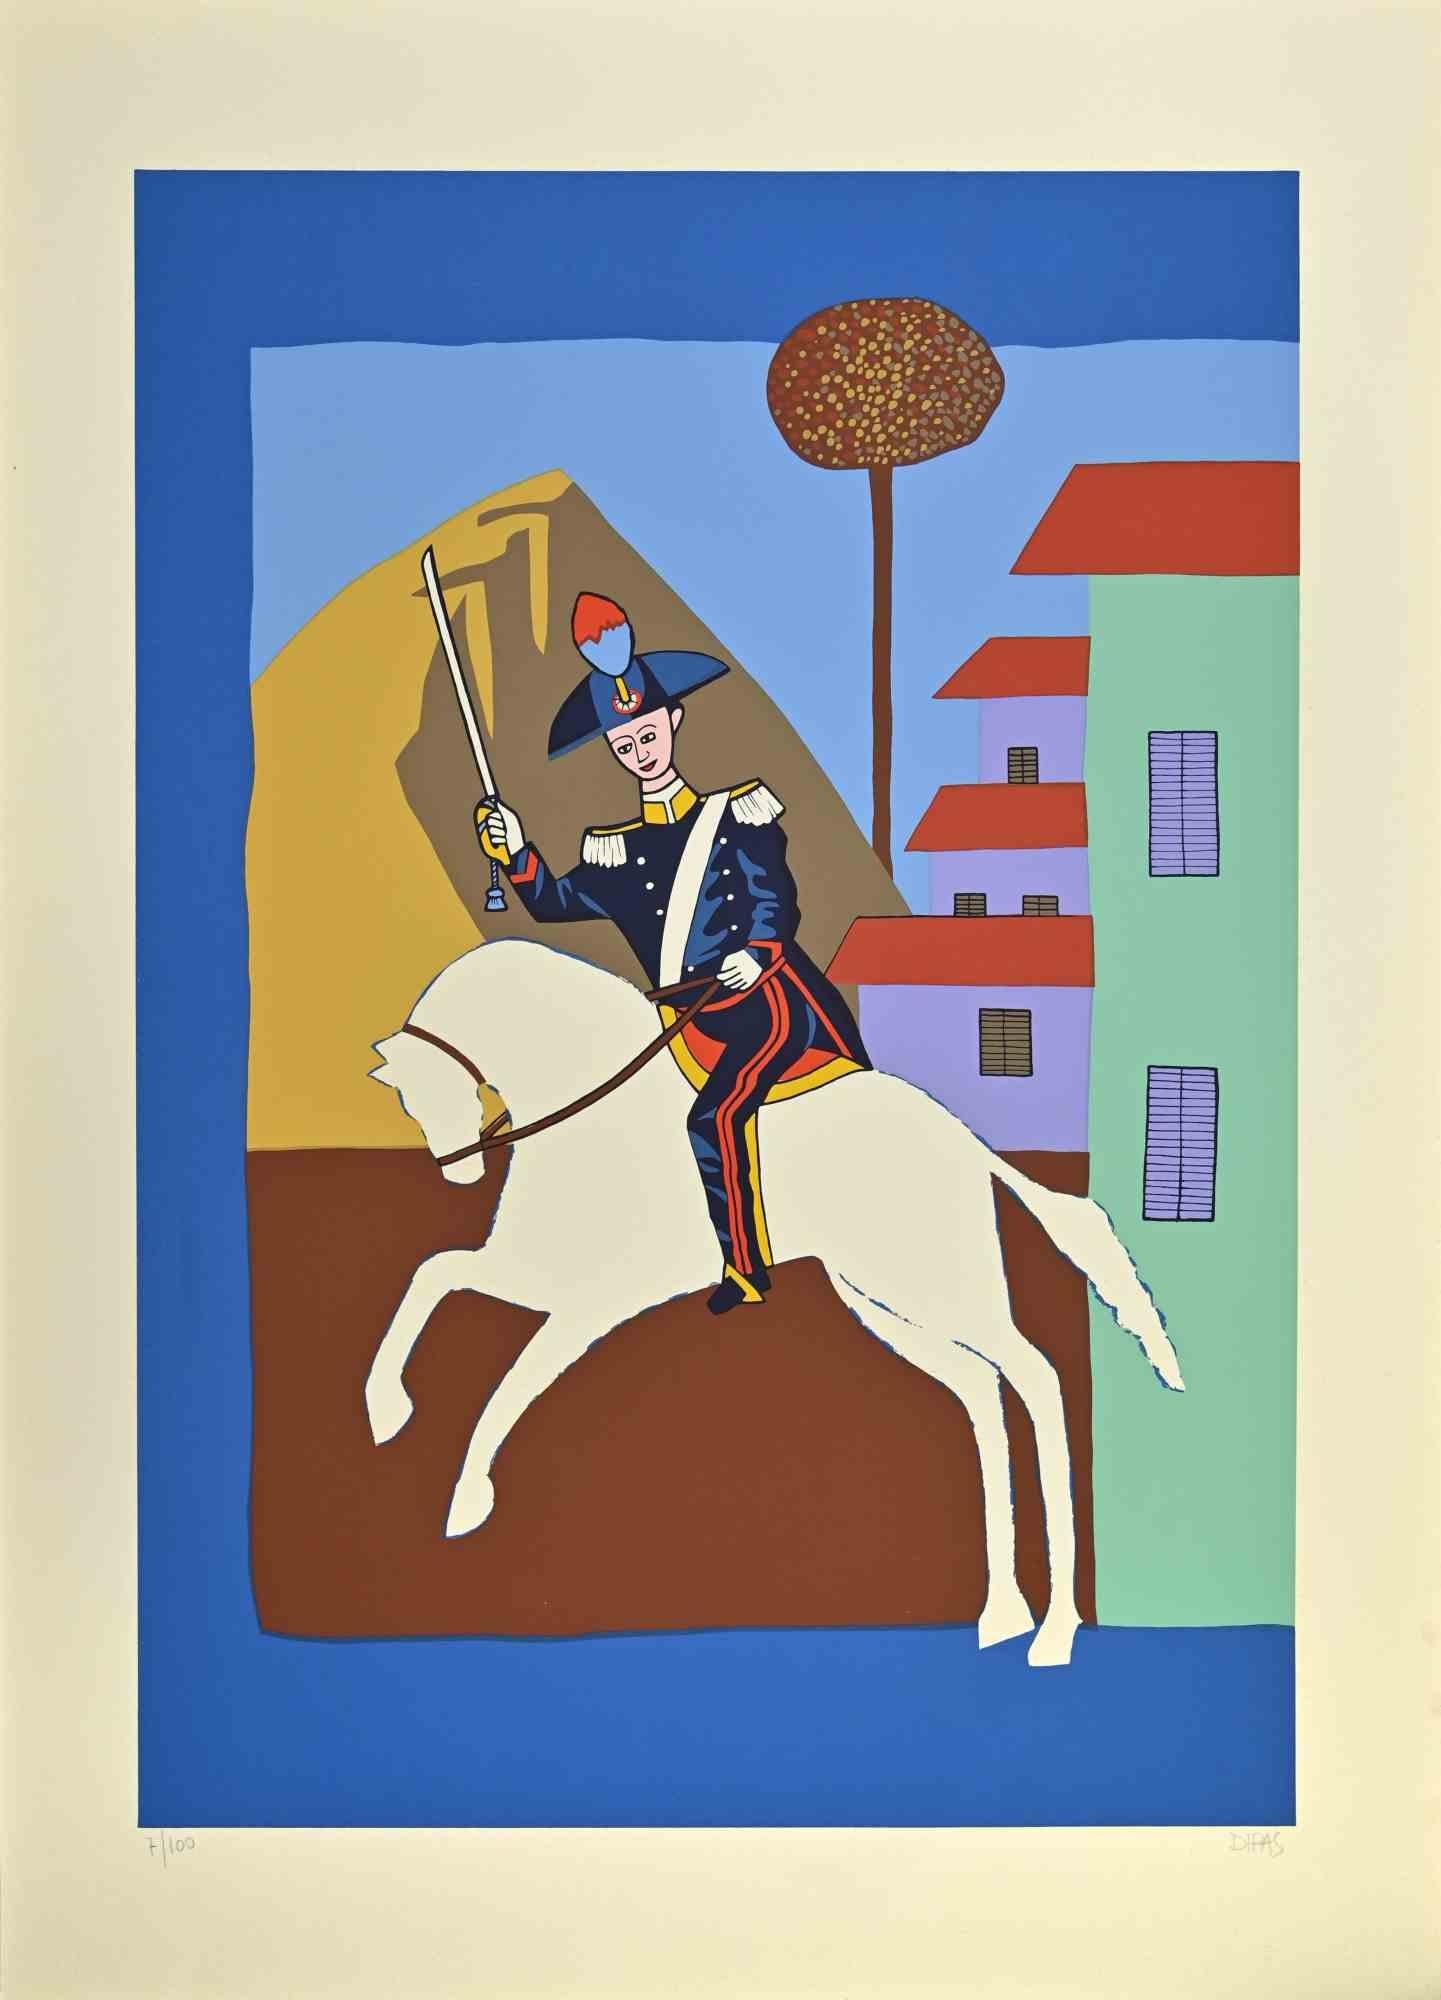 Carabinier Riding Horse is a contemporary artwork realized by the artist Dipas in the 1970s.

Mixed colored screen print.

Hand signed on the lower right margin.

Numbered on the lower left margin.

Edition of 7/100.